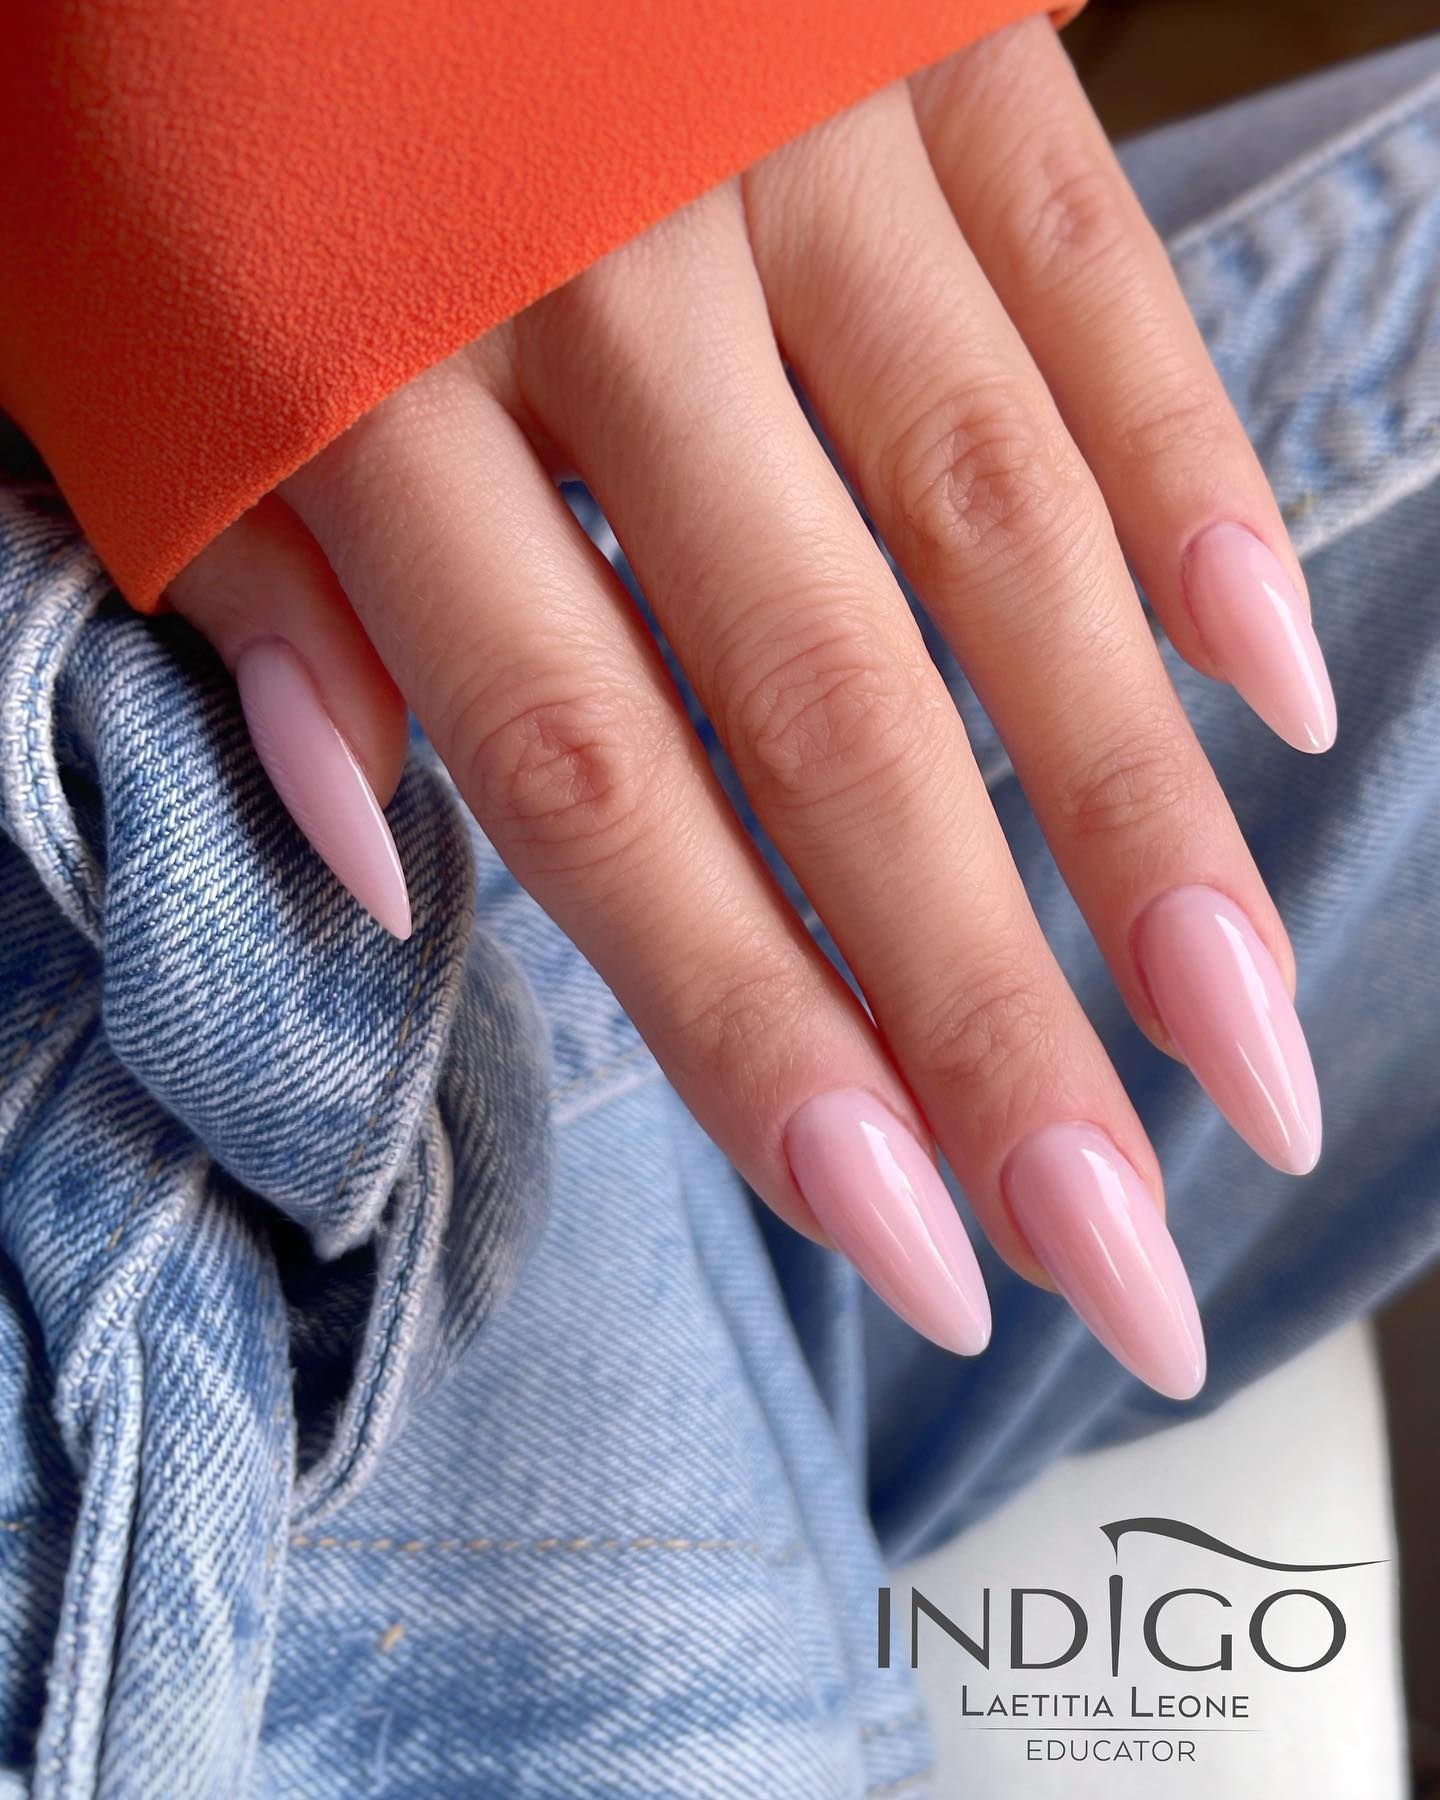 Long nude and acrylic nails such as these will look amazing for the prom season.